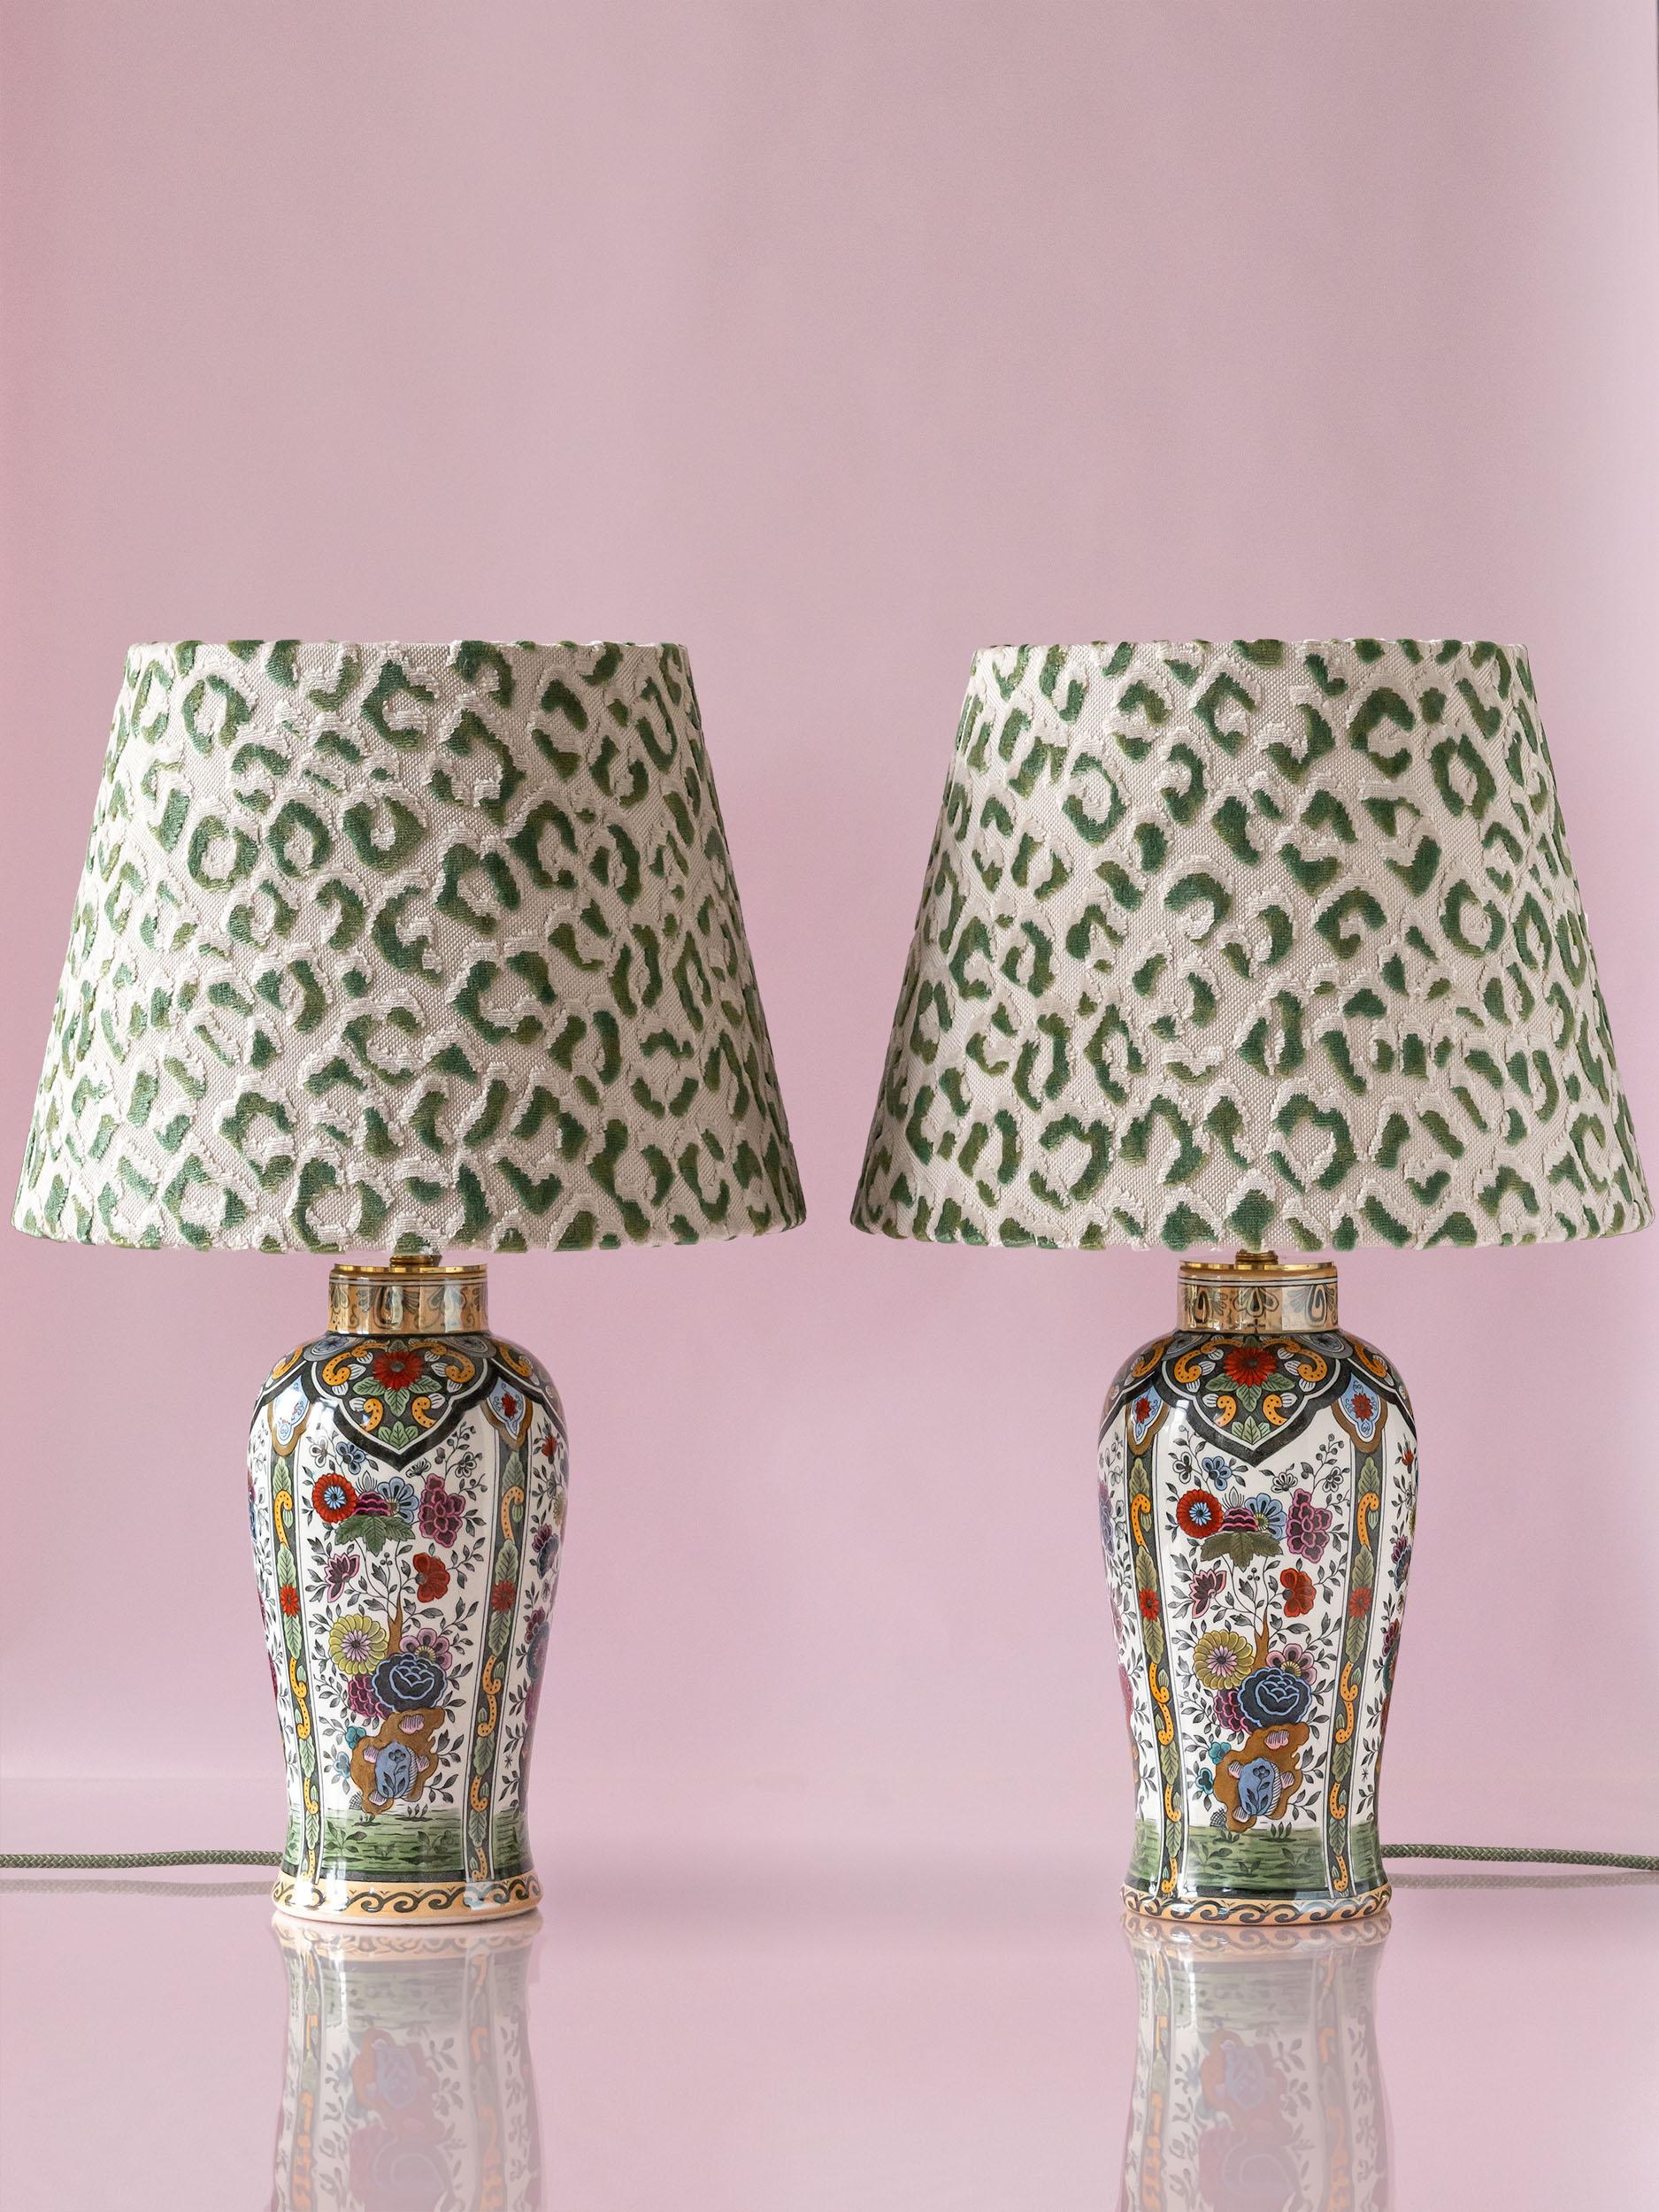 These one-of-a-kind lamps have been lovingly handcrafted from two vintage vases in a Delft Polychrome style made by De Sphinx (formerly Petrus Regout) in Maastricht, the Netherlands. The shades were handmade by an atelier in Amsterdam in a funky